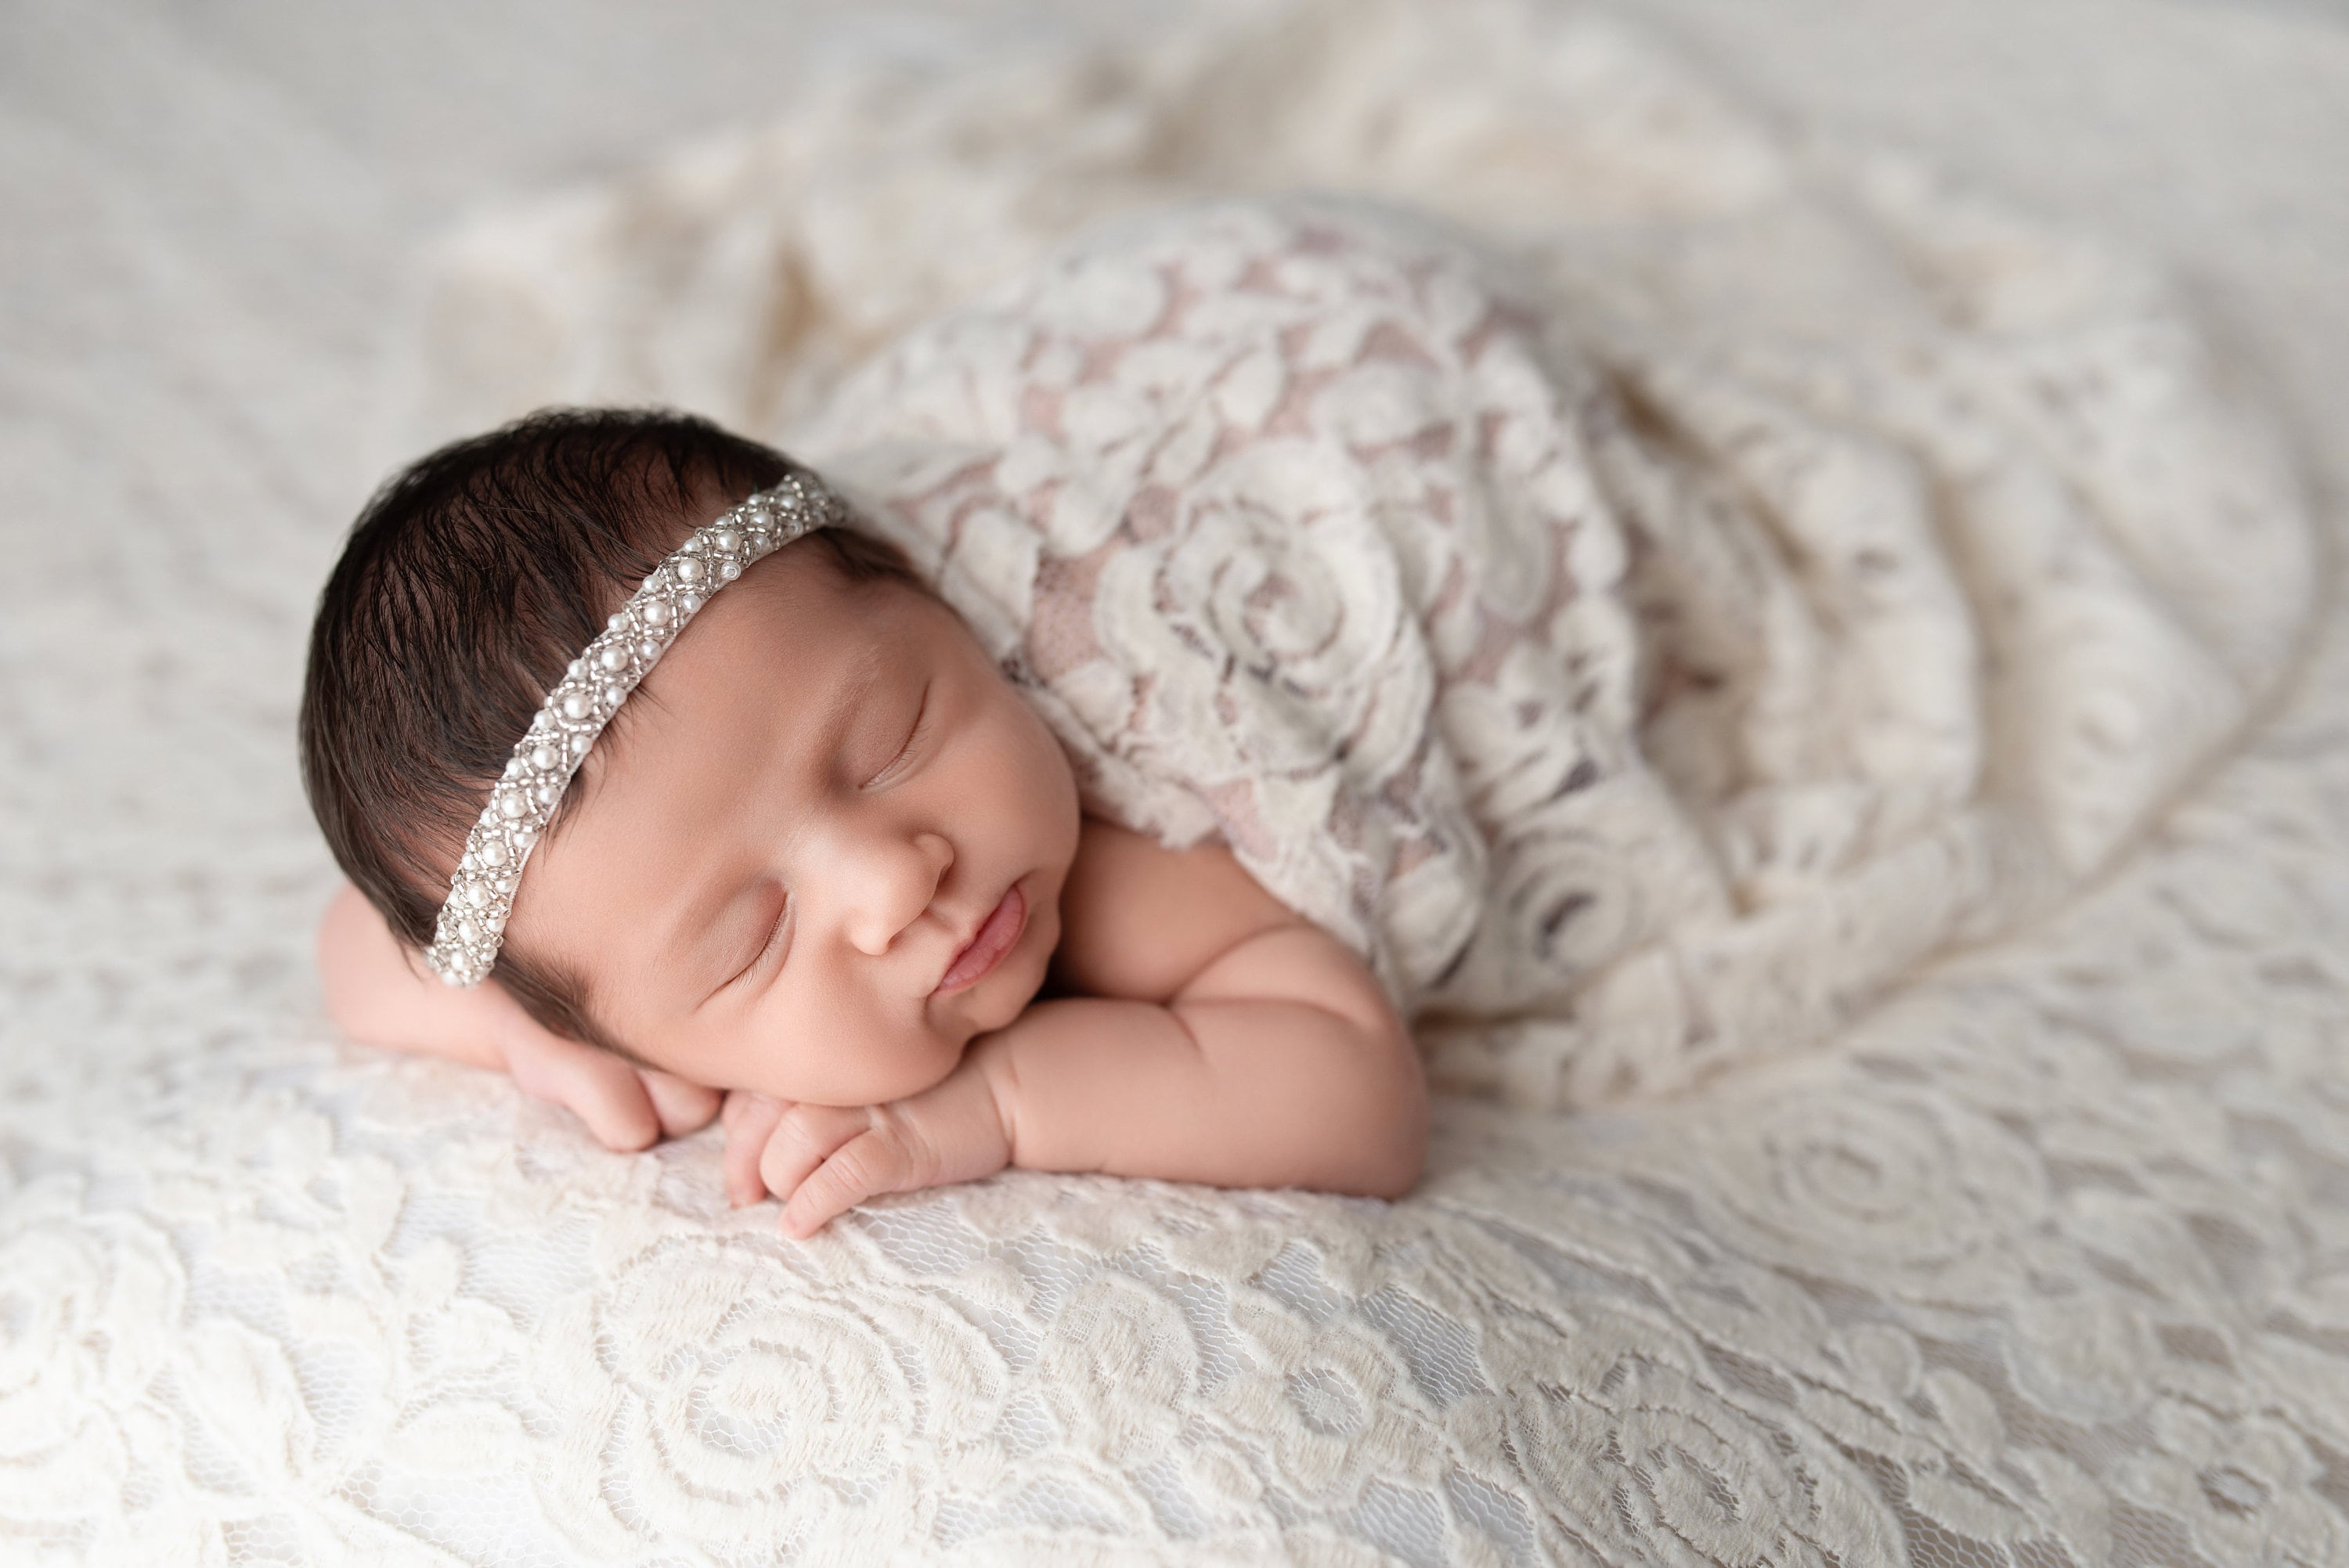 Buy Newborn Hair Band Online In India - Etsy India